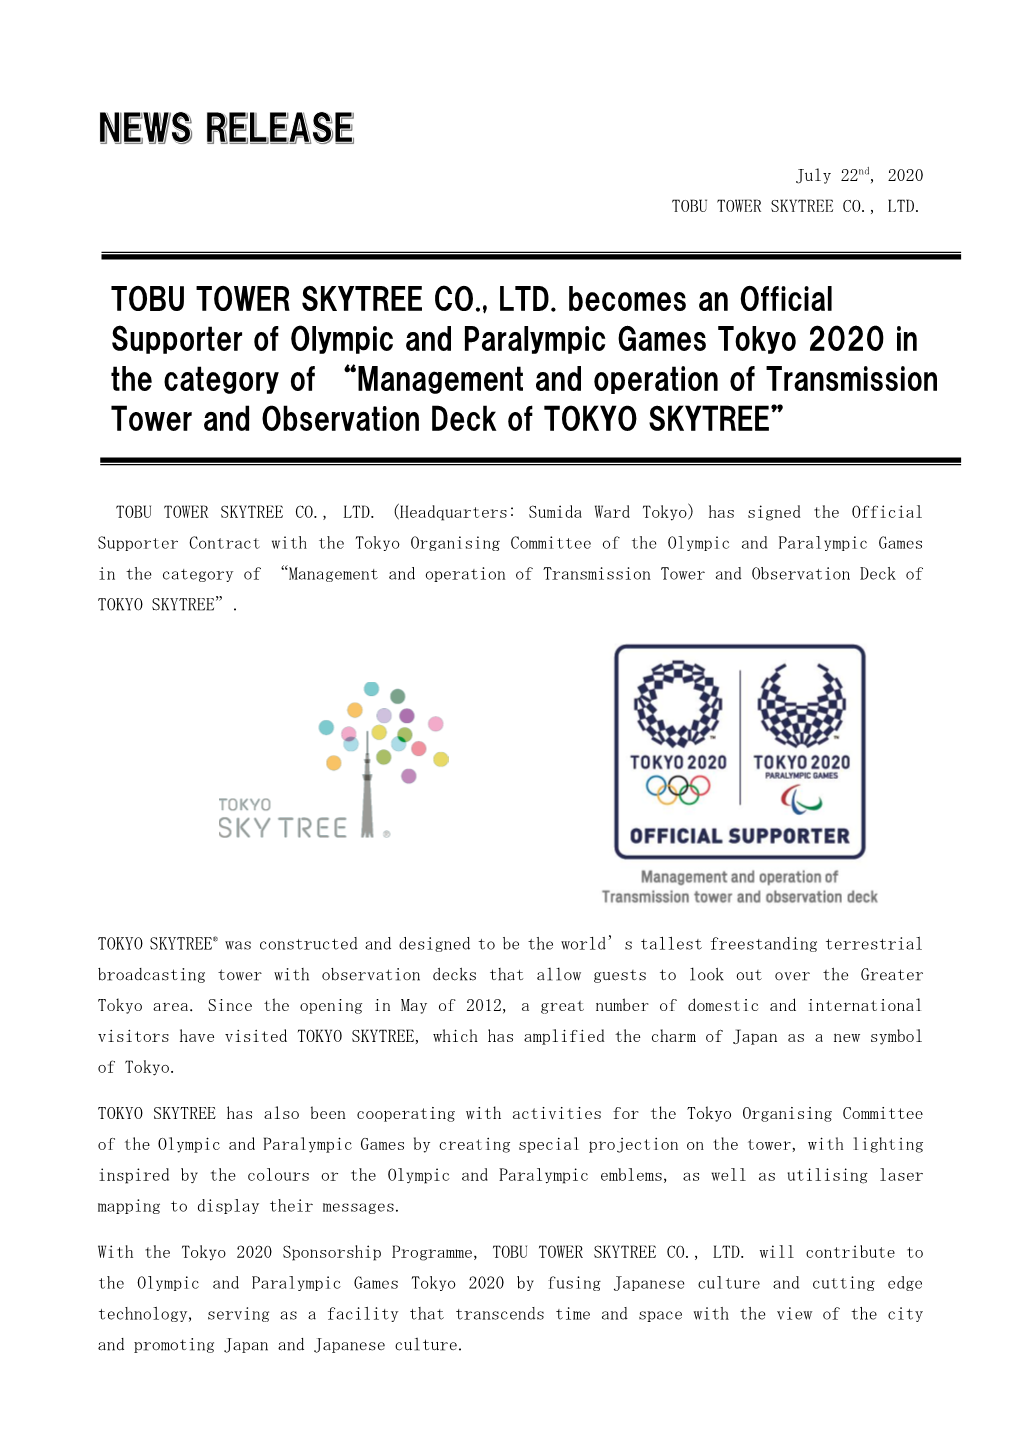 TOBU TOWER SKYTREE CO., LTD. Becomes an Official Supporter Of